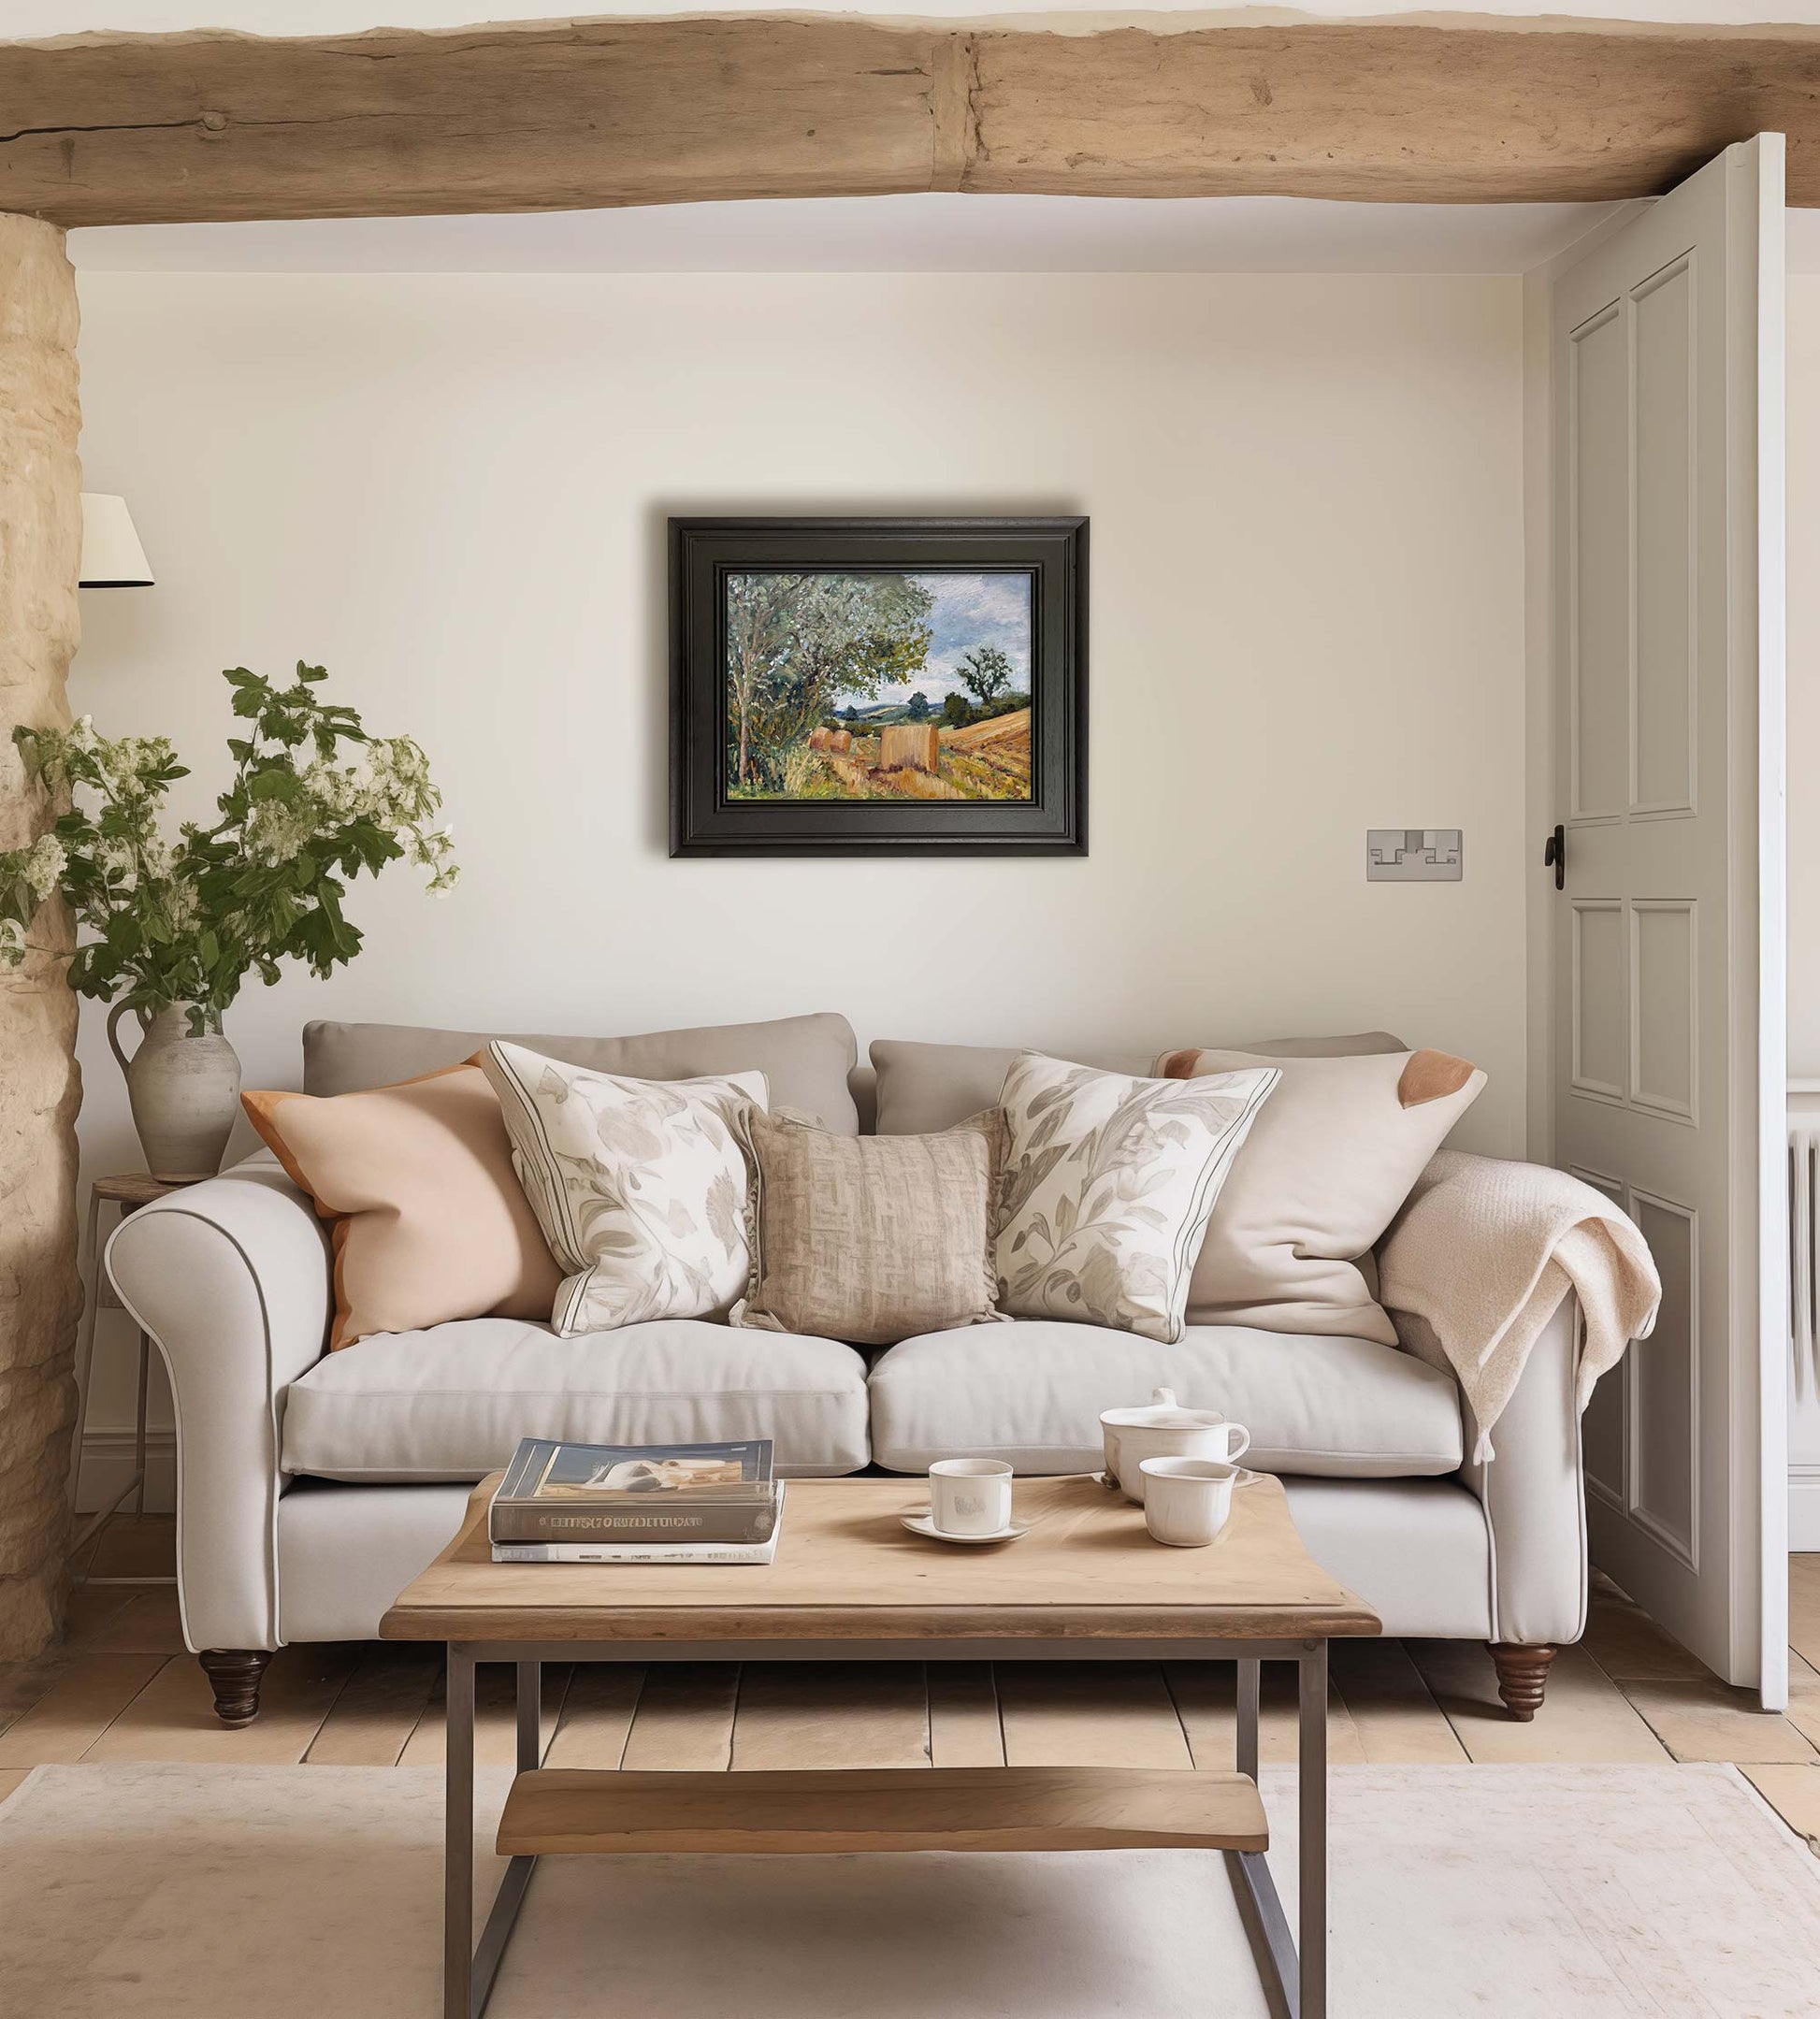 Framed contectual view of straw bales, Coxwold North Yorkshire in country home interior by Jeff Parker